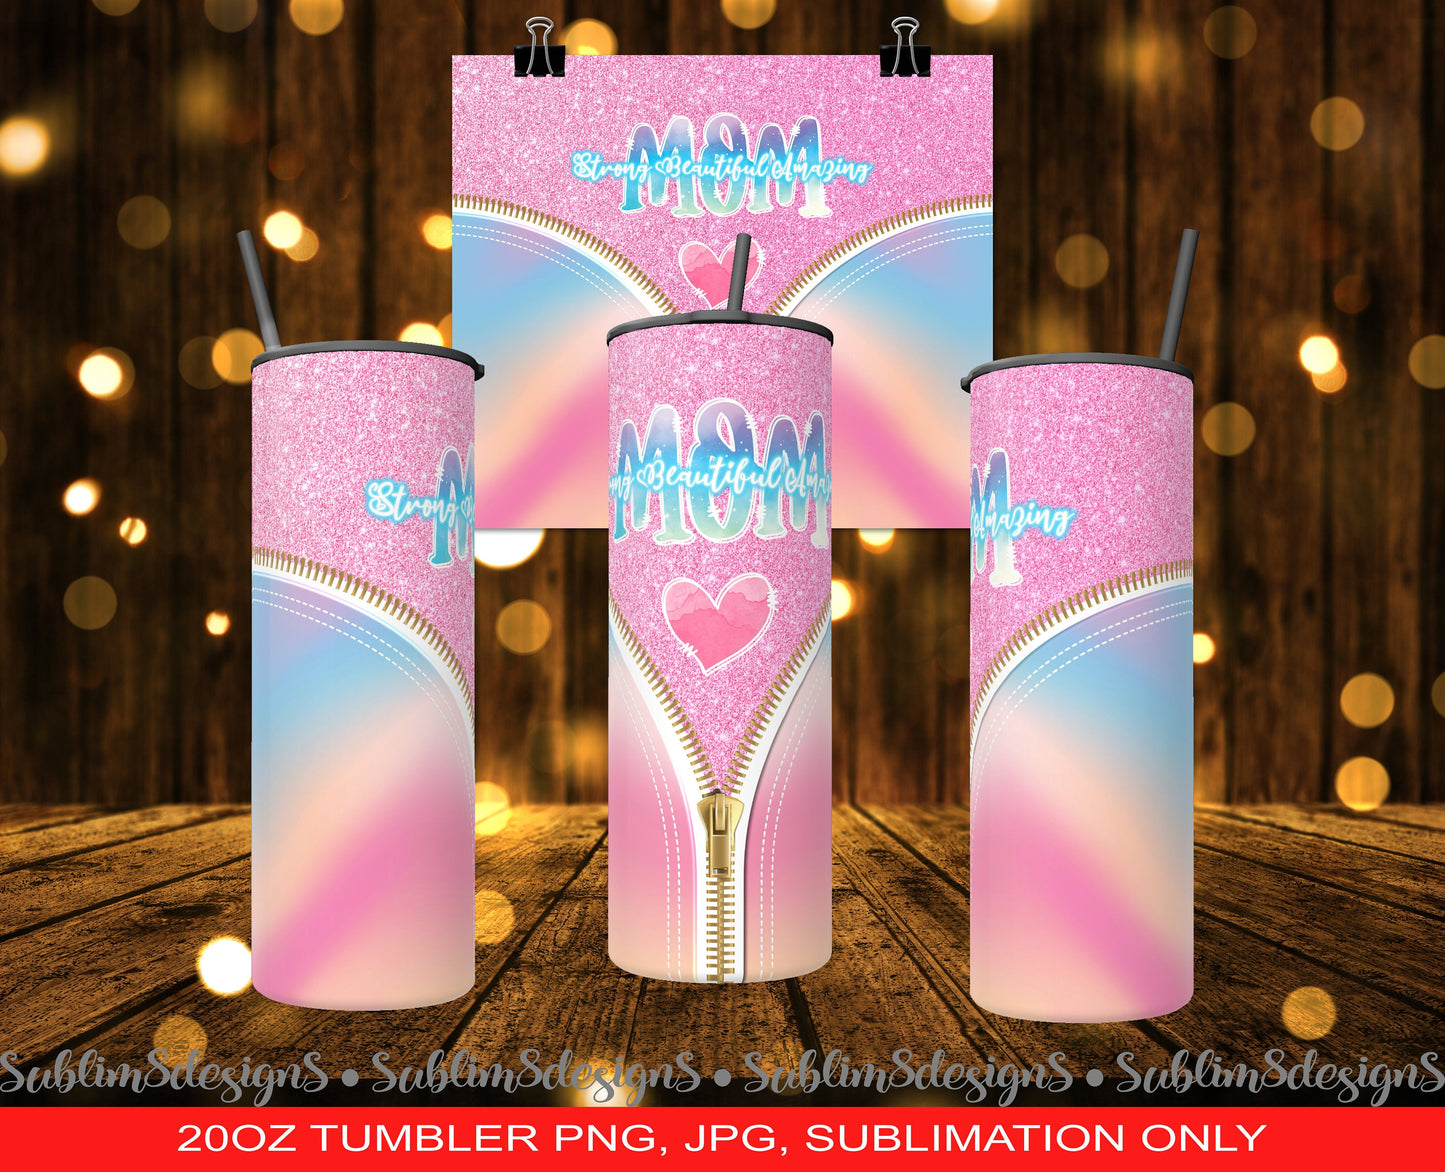 Mom Design Pastel Marble Zip: Celebrating Strength, Beauty, and Love 20oz Sublimation Tumbler Design Wrap PNG and JPEG ONLY